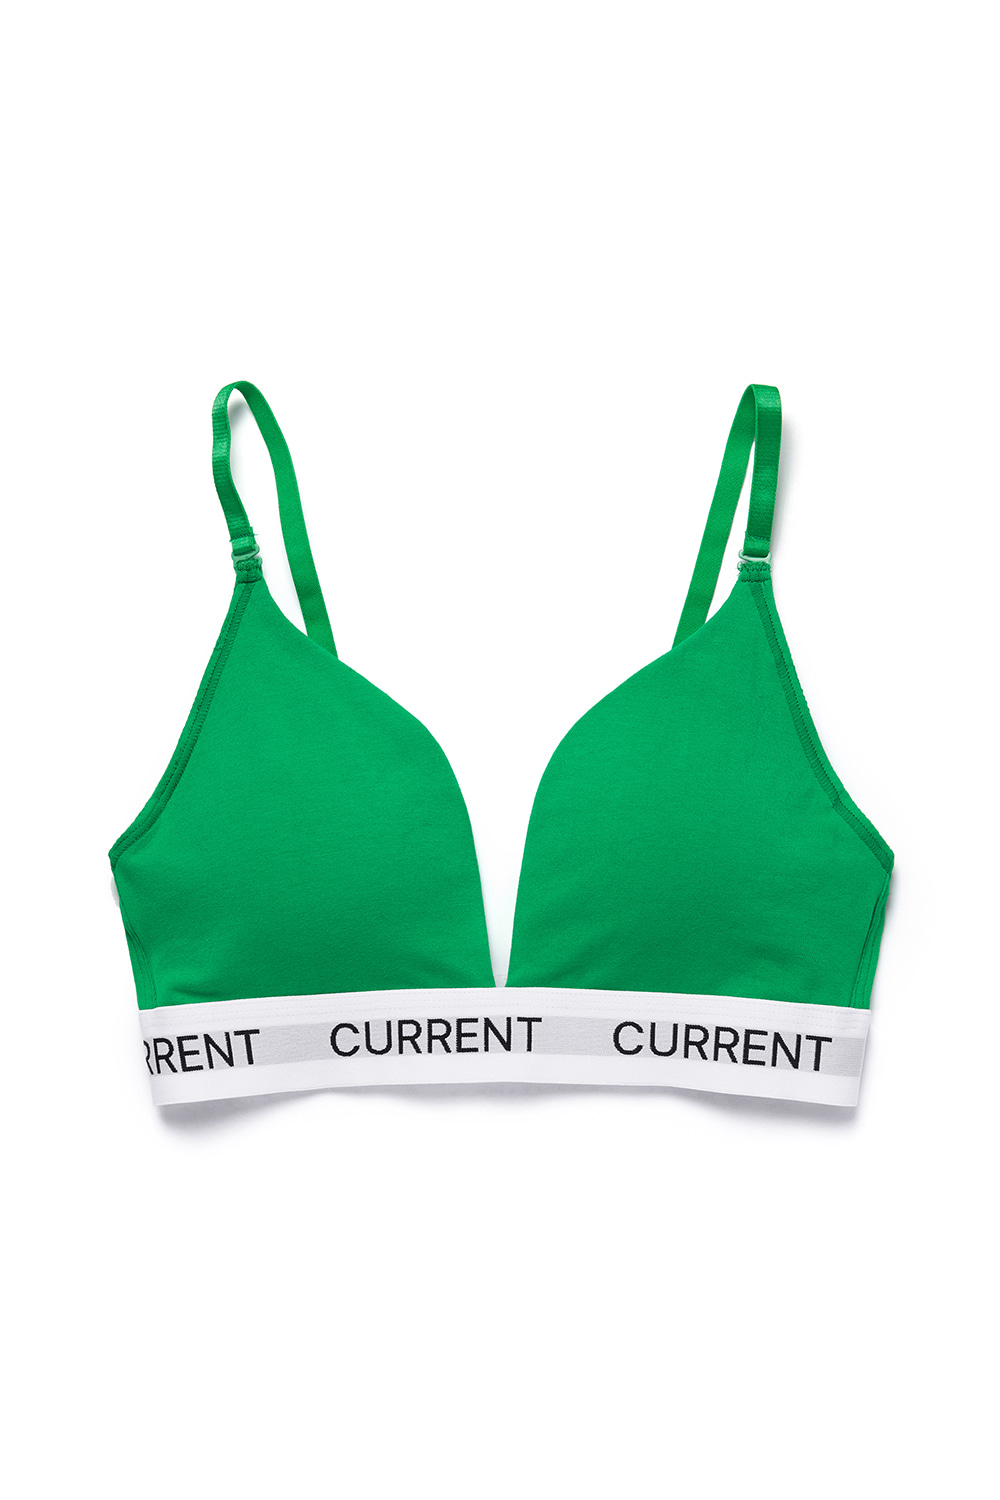 CURRENT EASY BANDING BRA [GREEN/BROWN]_2PACK		